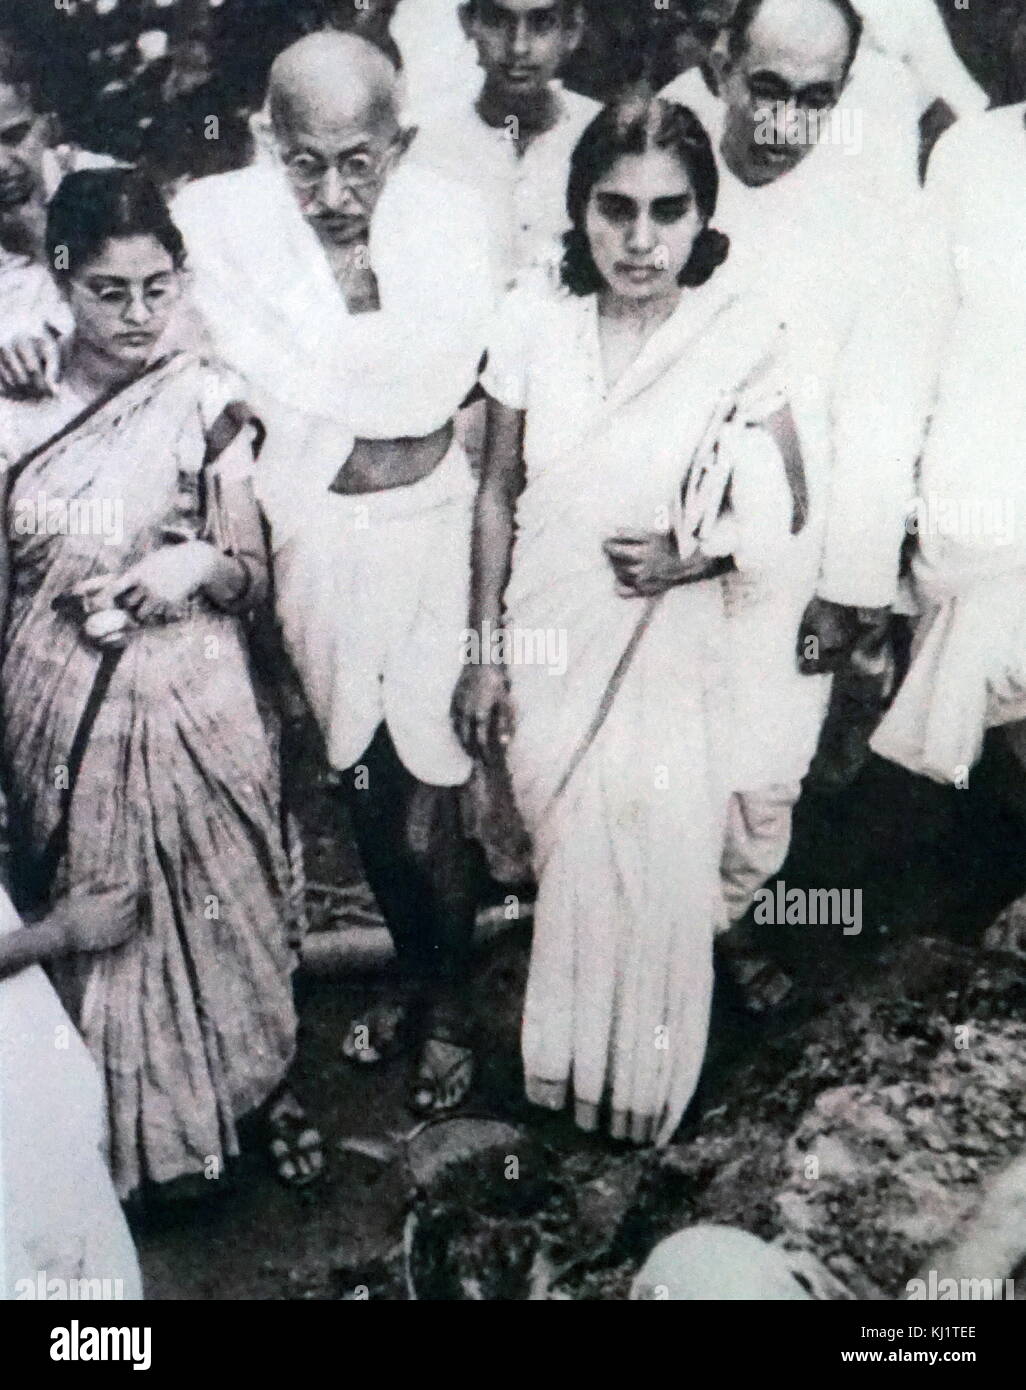 Mahatma Gandhi after a hunger strike is supported by his granddaughter Abha (left) and his doctor Sushila Nayyar. Pyarelal Nayyar his personal secretary stands to the far right. Stock Photo